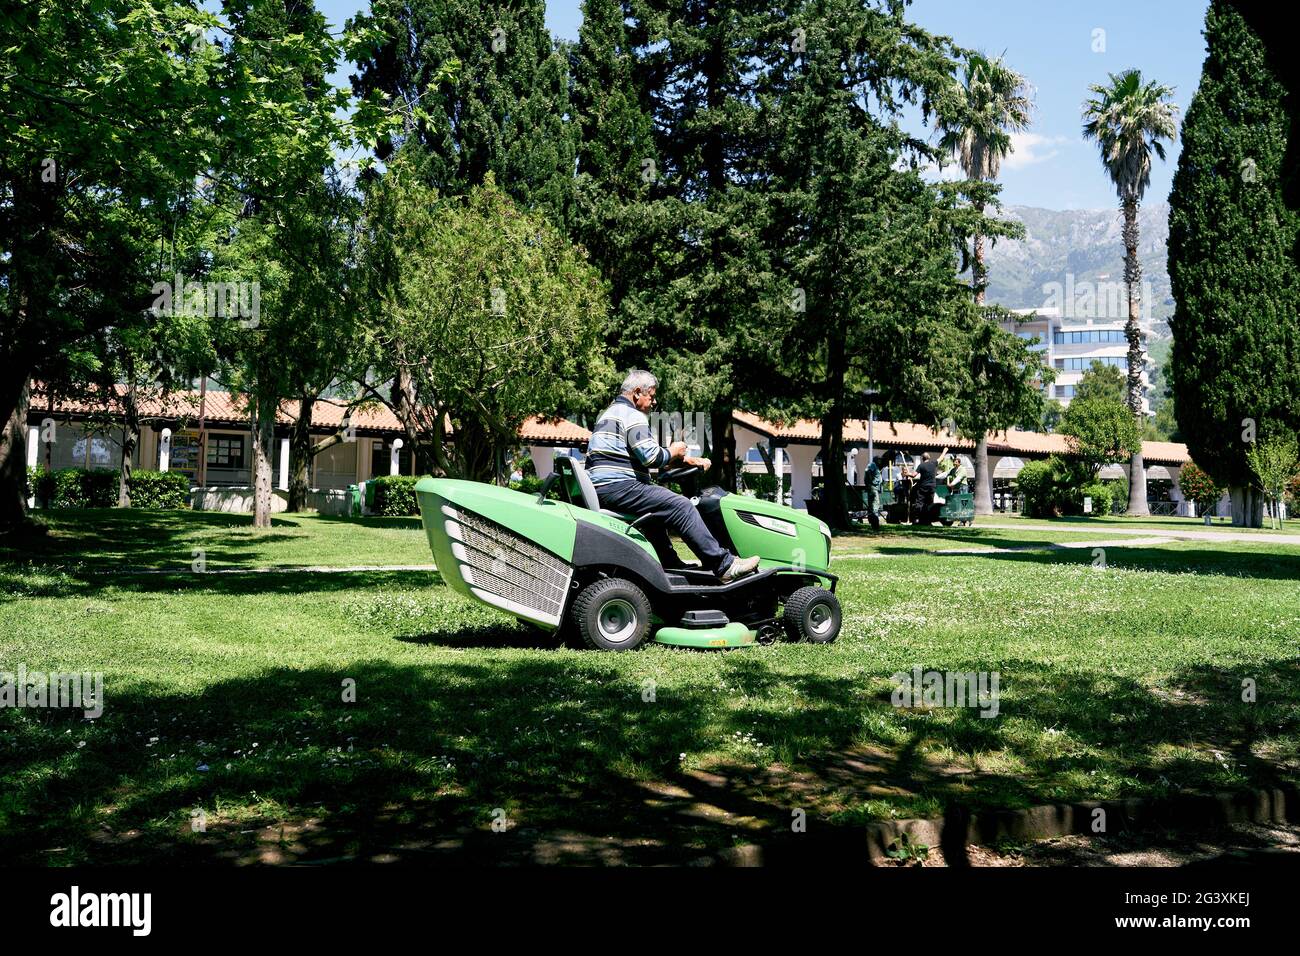 Man rides a green large lawn mower in the park among the trees Stock Photo